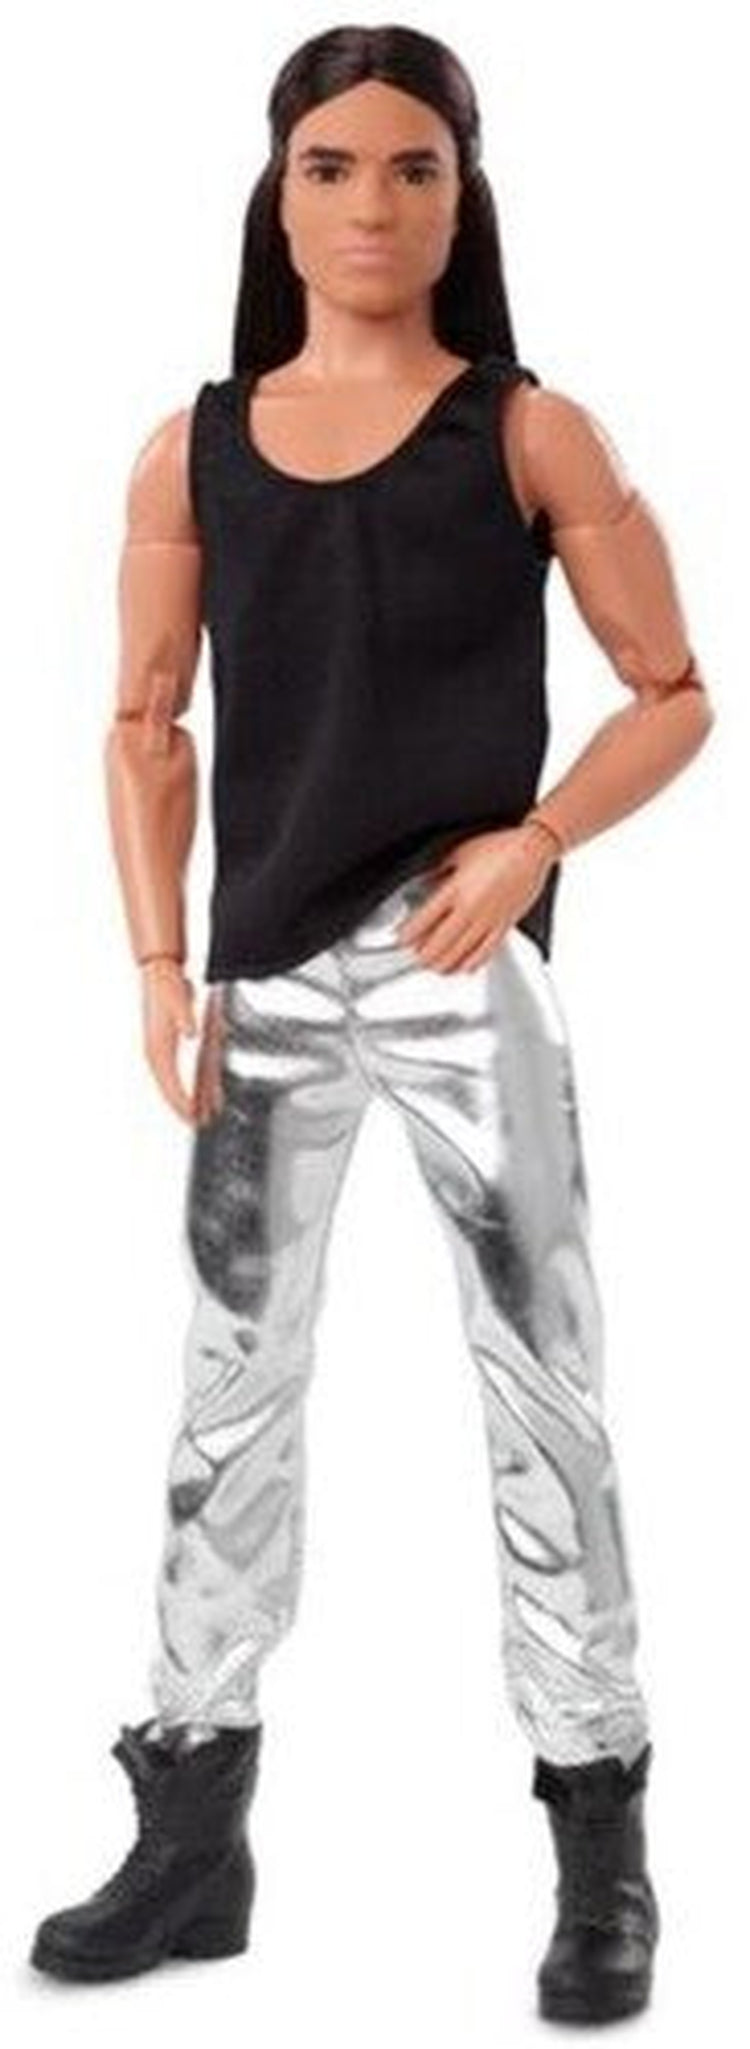 Mattel - Barbie Signature Looks Doll, with Black Tank Top, Silver Pants and Long Dark Hair